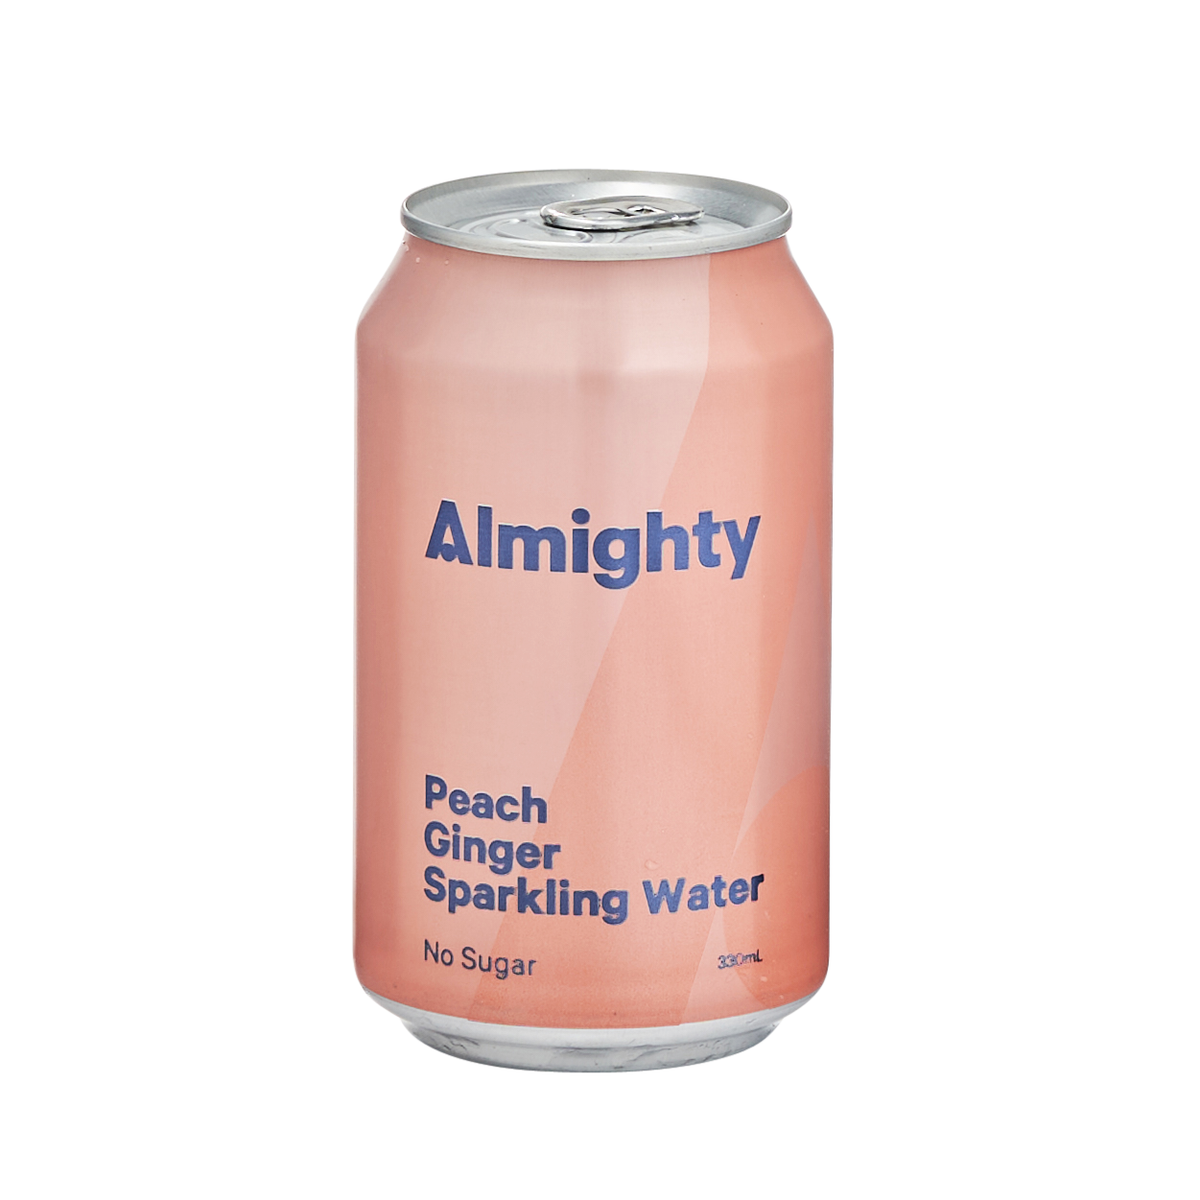 Almighty Sparkling Water